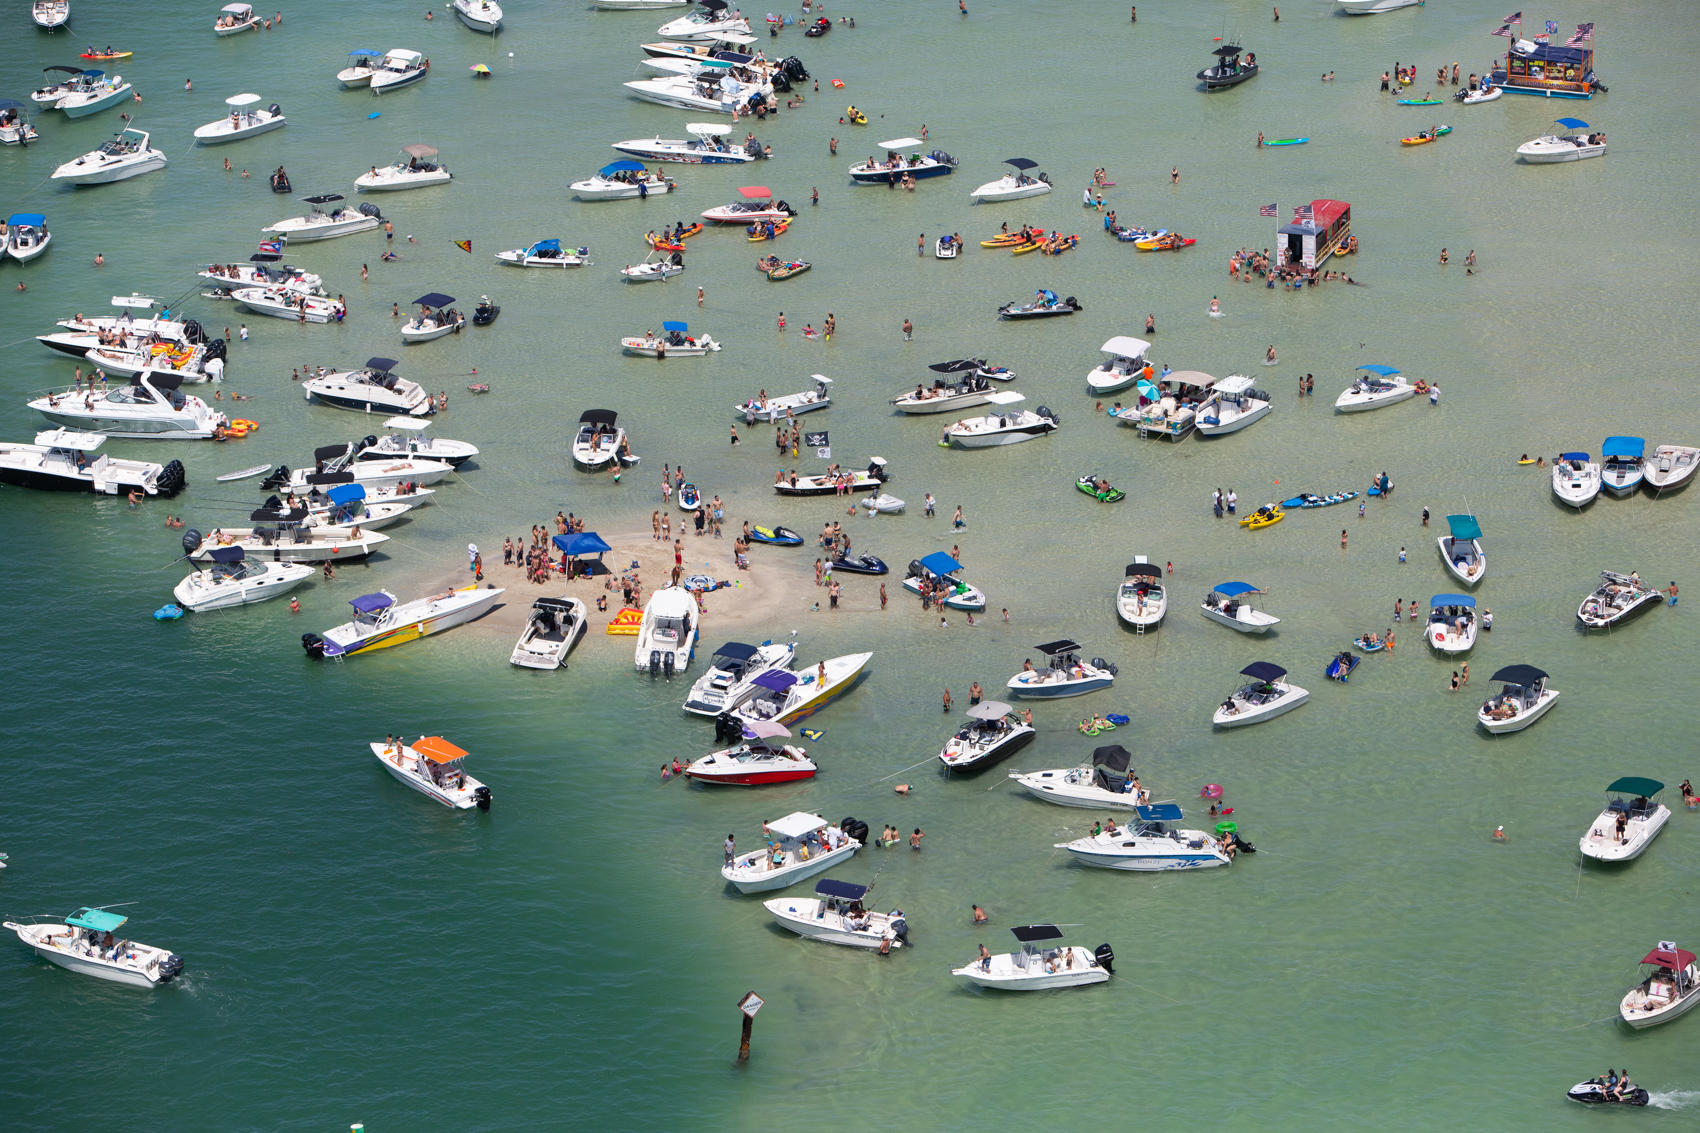 A school of speed boats and jet skis crowd to Haulover Sandbar, a popular offshore destination north of Miami, Florida.